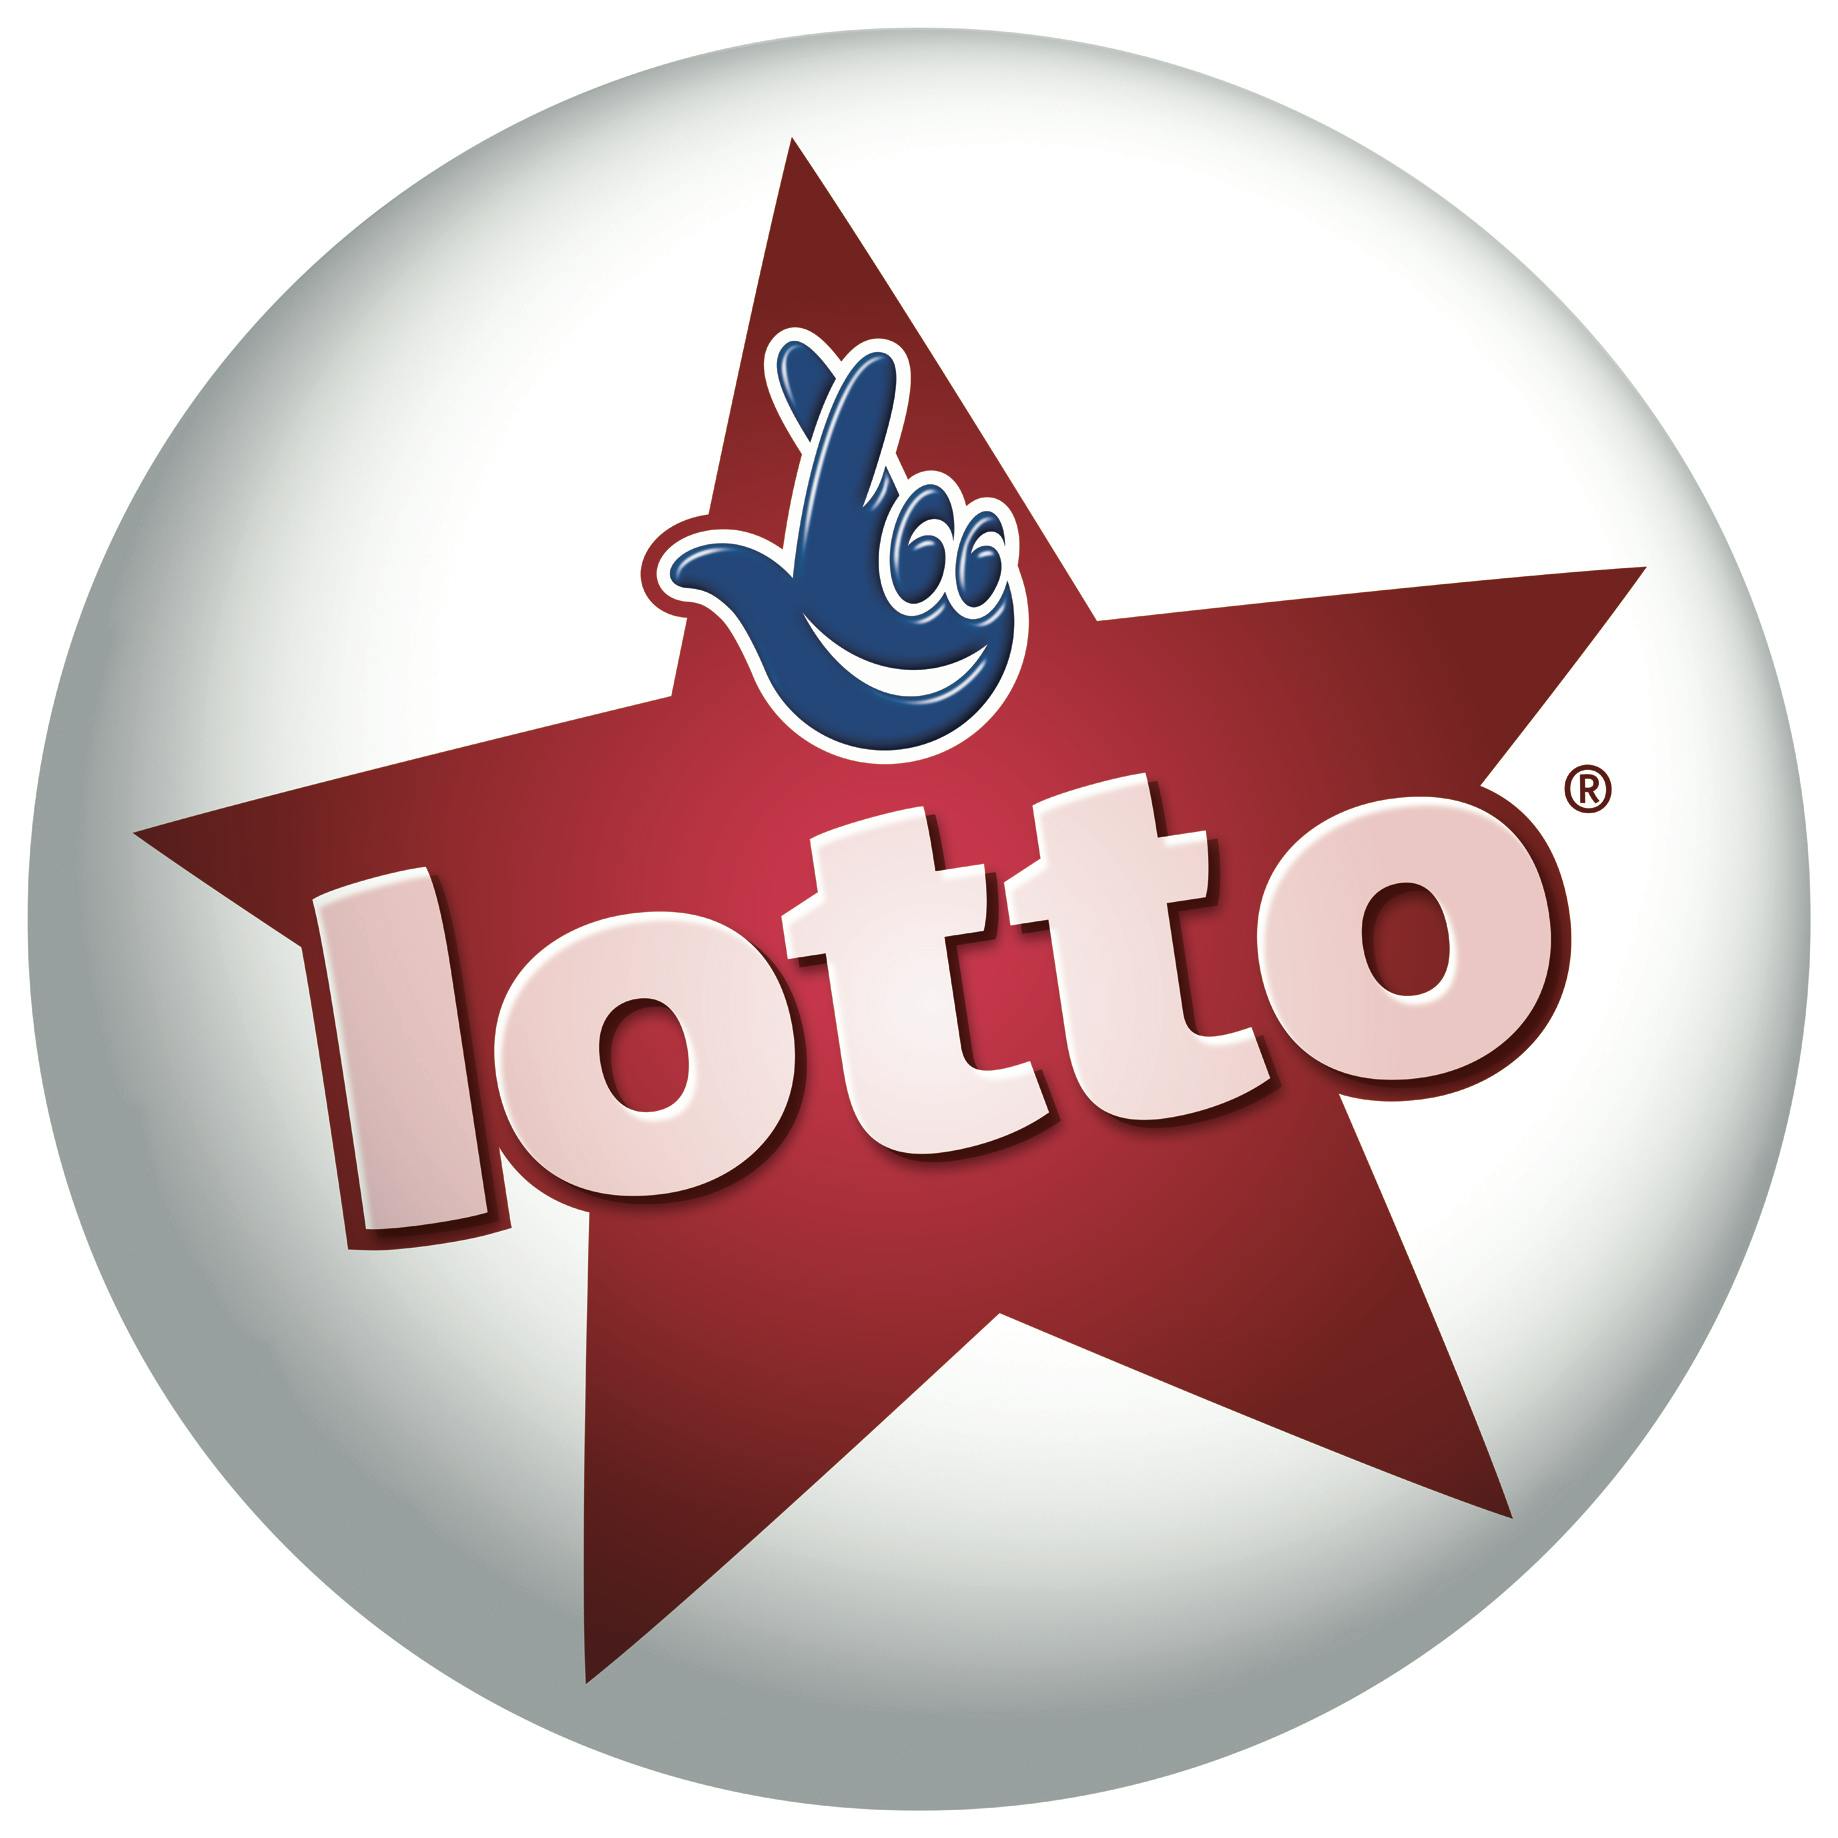 check lotto nz scan